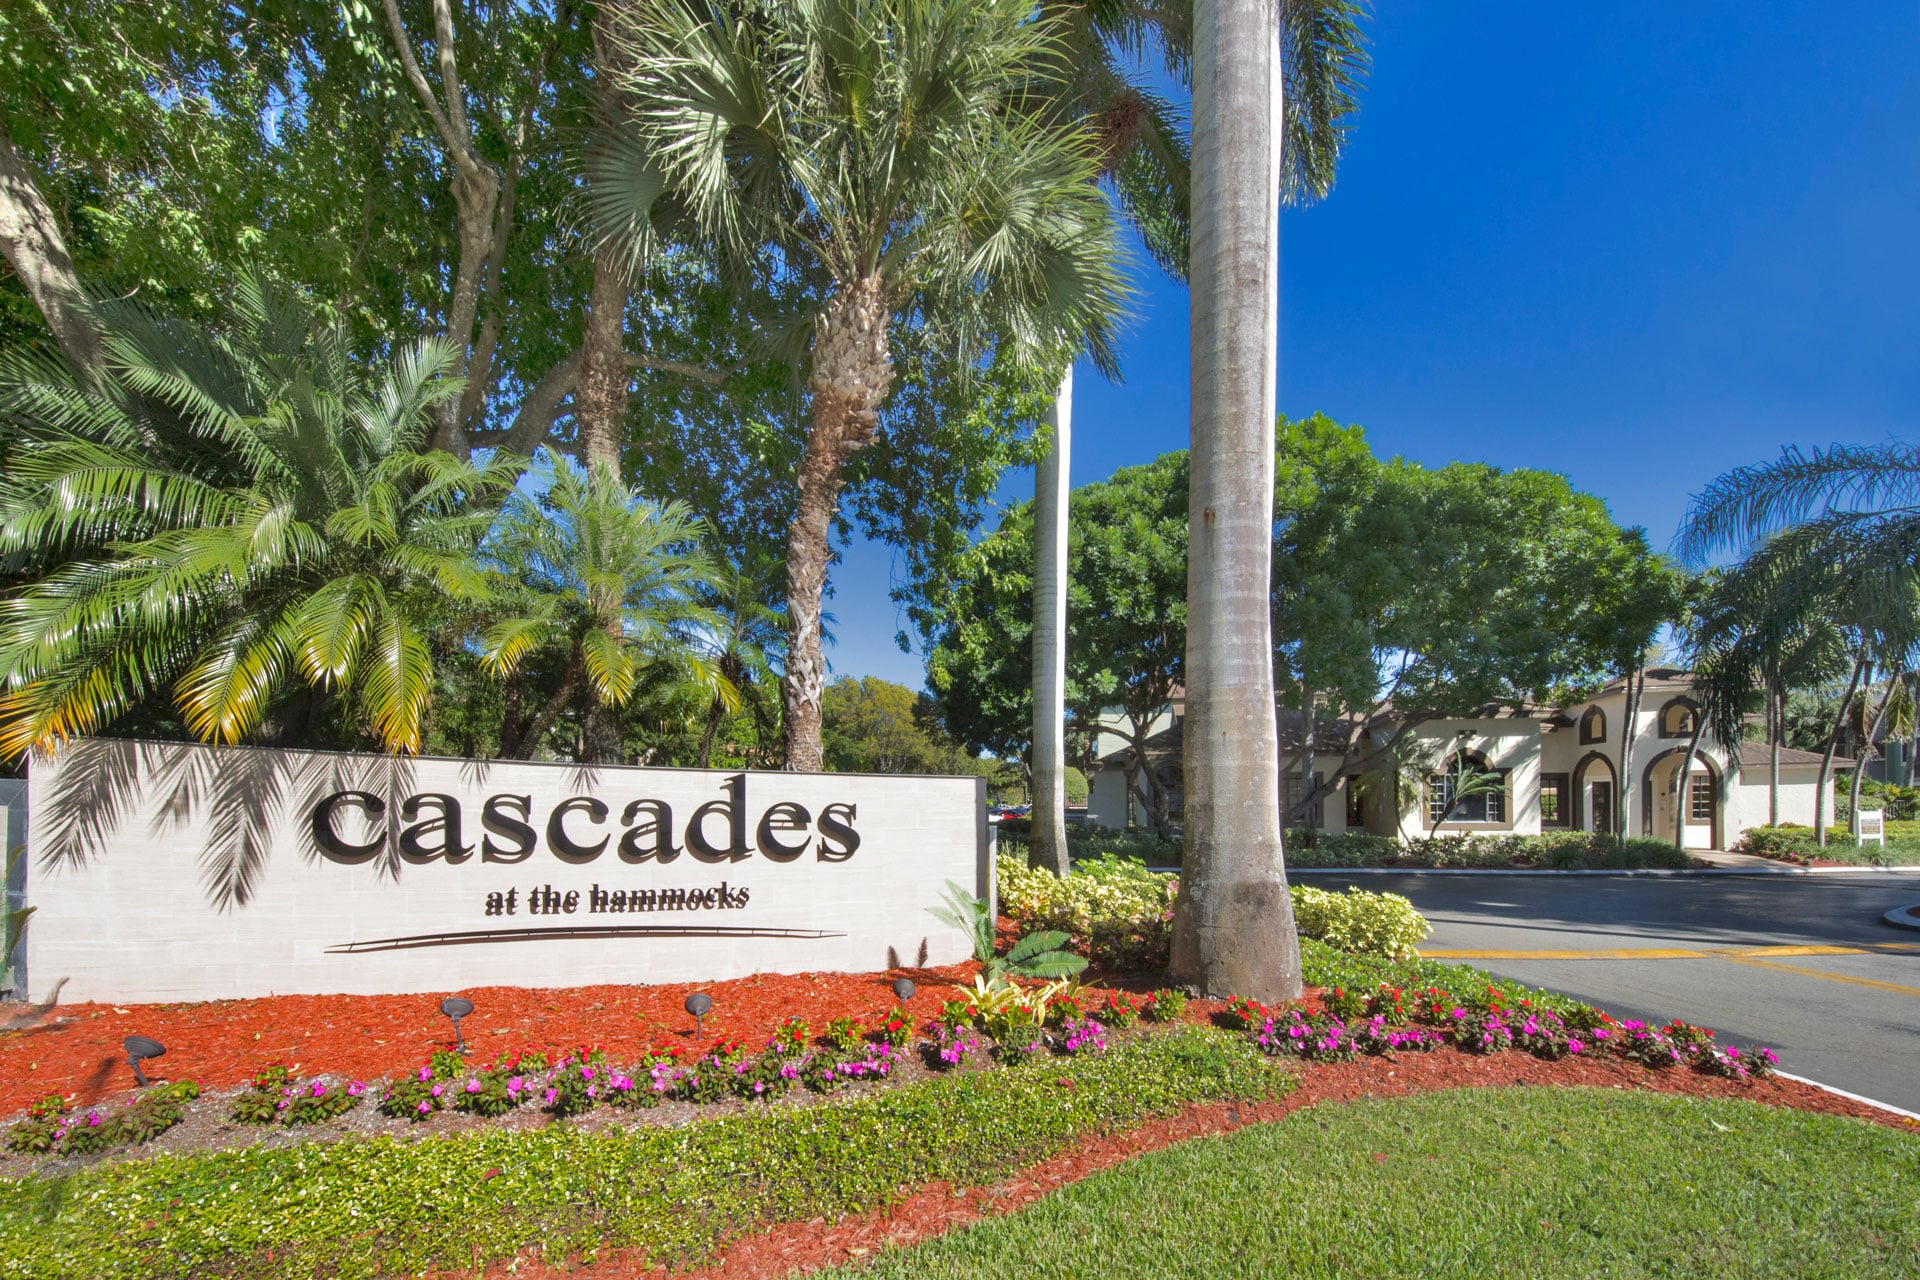 Exterior entrance sign with colorful landscaping.